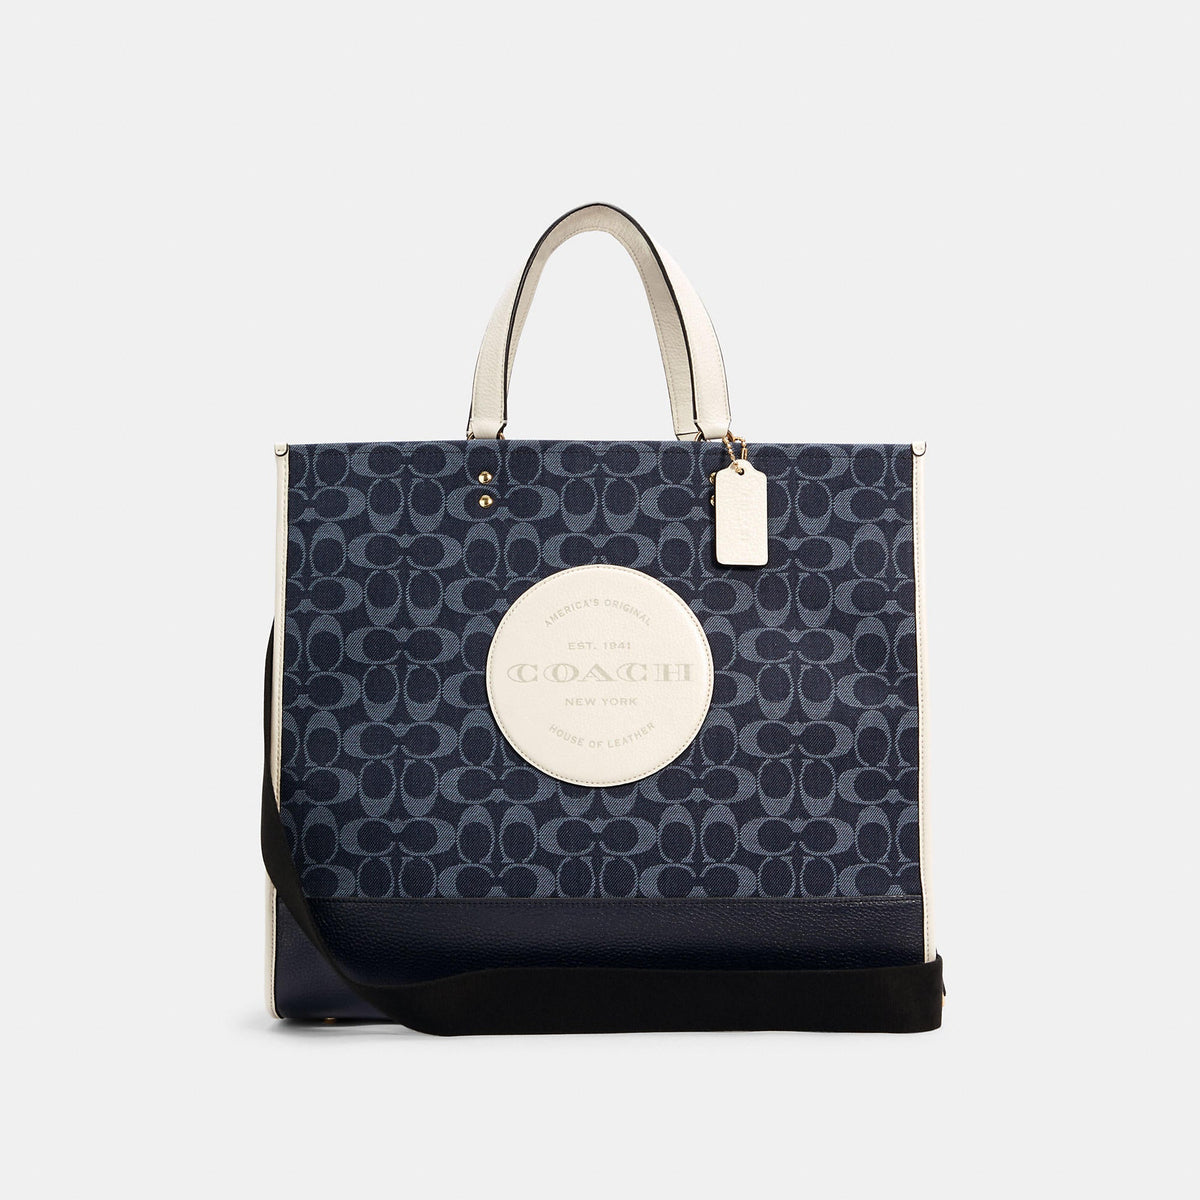 Coach Outlet Dempsey Tote 40 In Signature Denim With Coach Patch - TJ Outlet